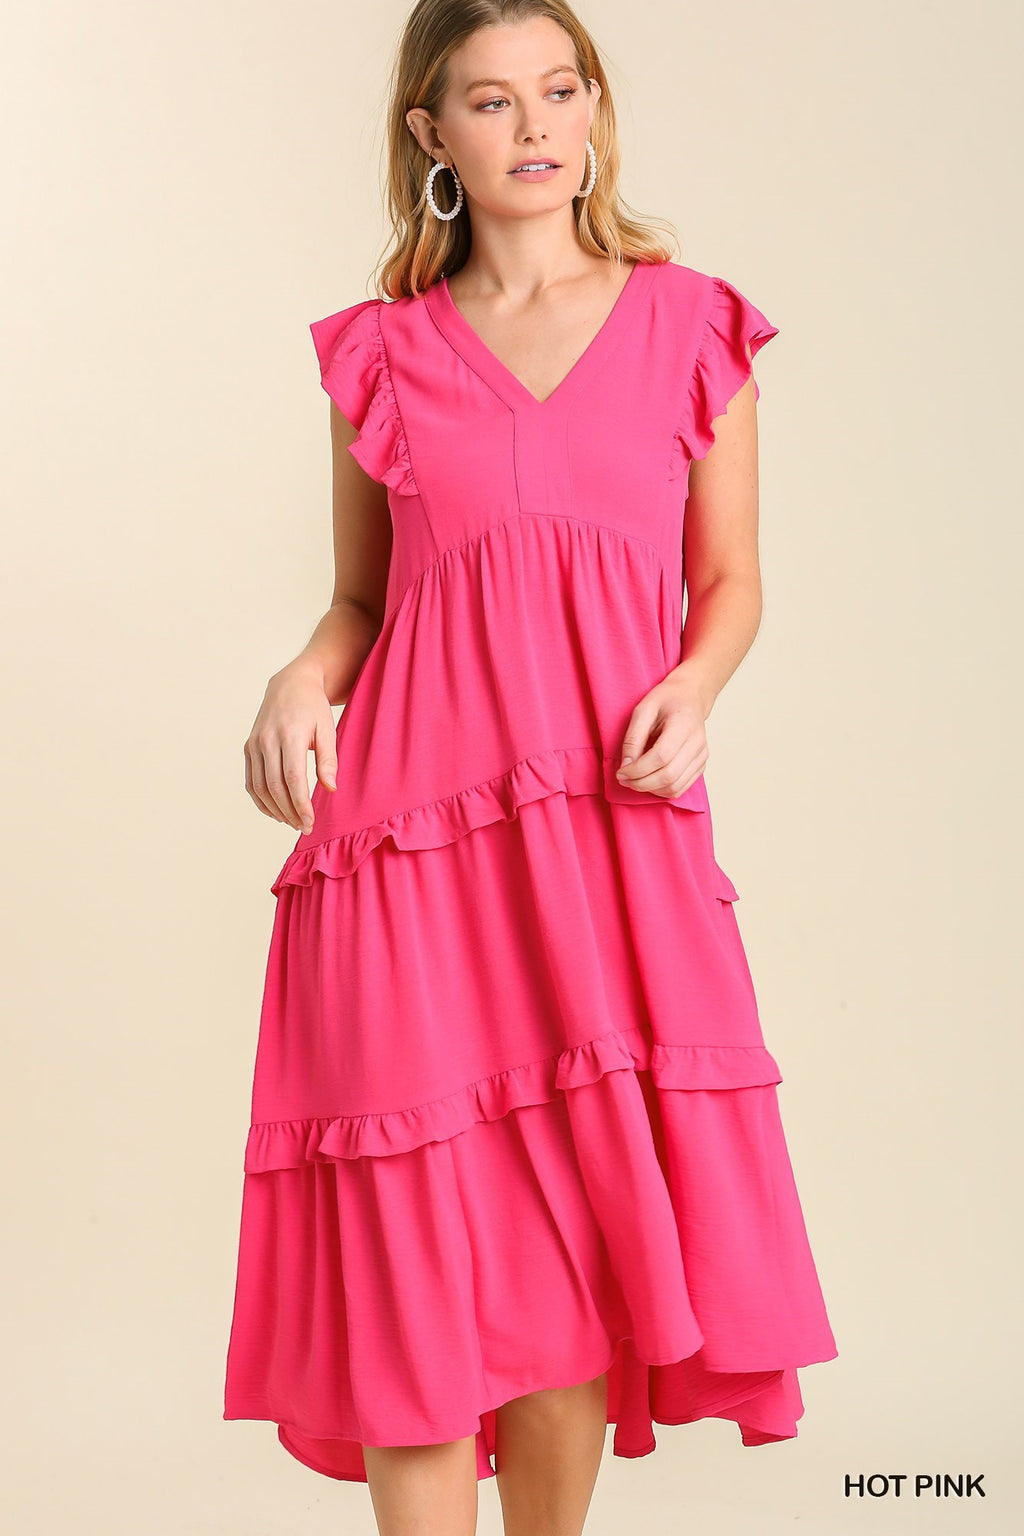 Umgee Clothing Pink Tiered Babydoll Tunic Top with Crochet Sleeves –  Hometown Heritage Boutique